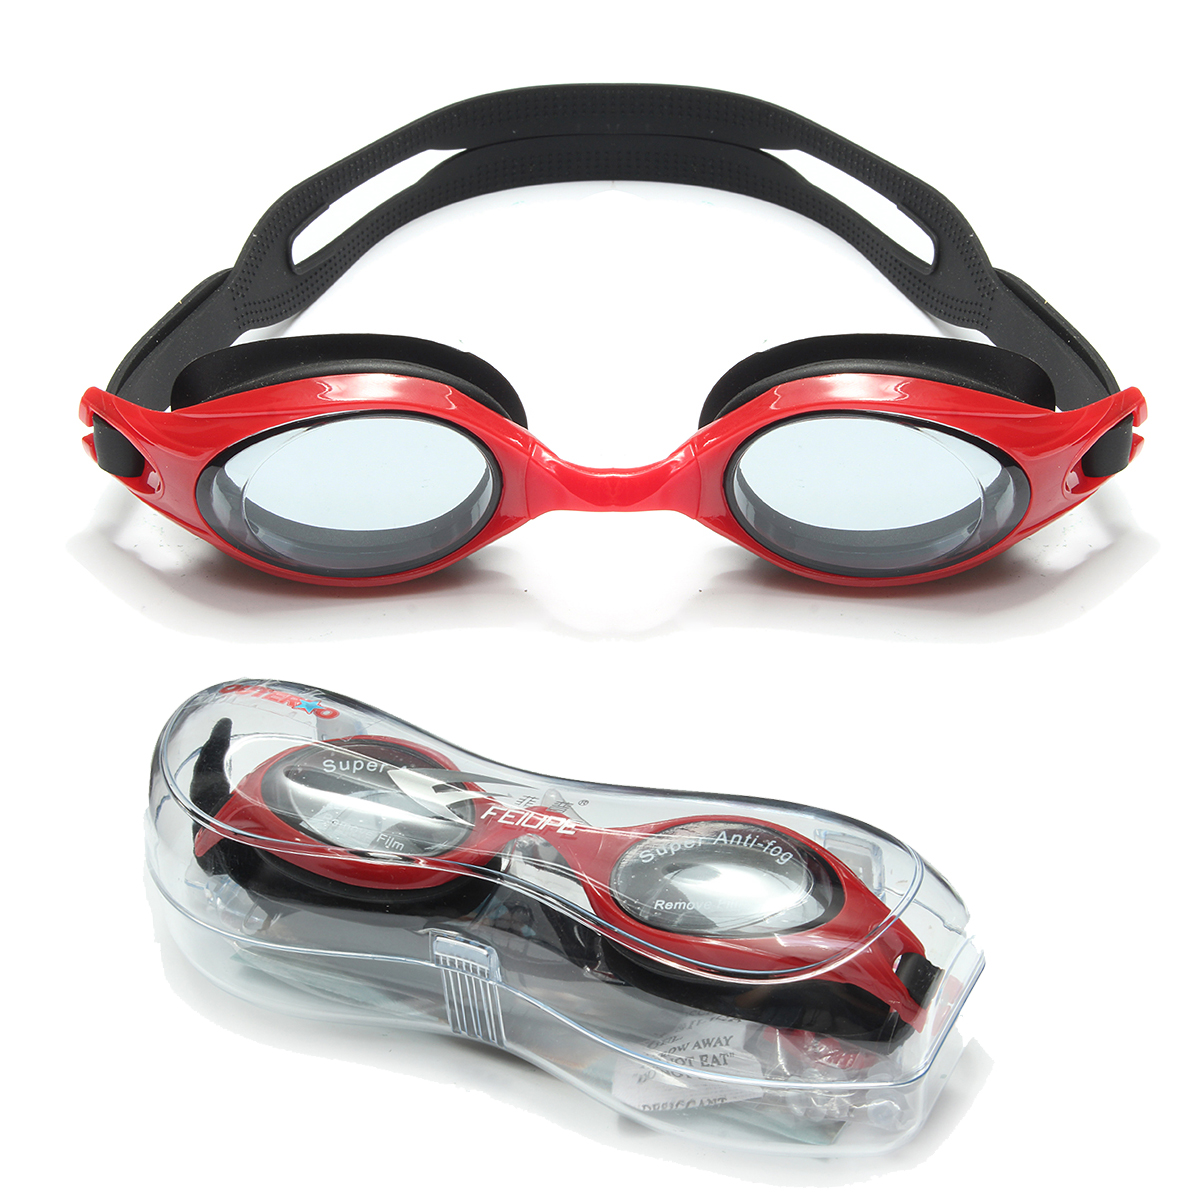 OUTEROO-Swimming-Glasses-PC-Silicone-Shockproof-Anti-fog-Anti-UV-Adjustable-Swimming-Goggles-for-Adu-1886066-17